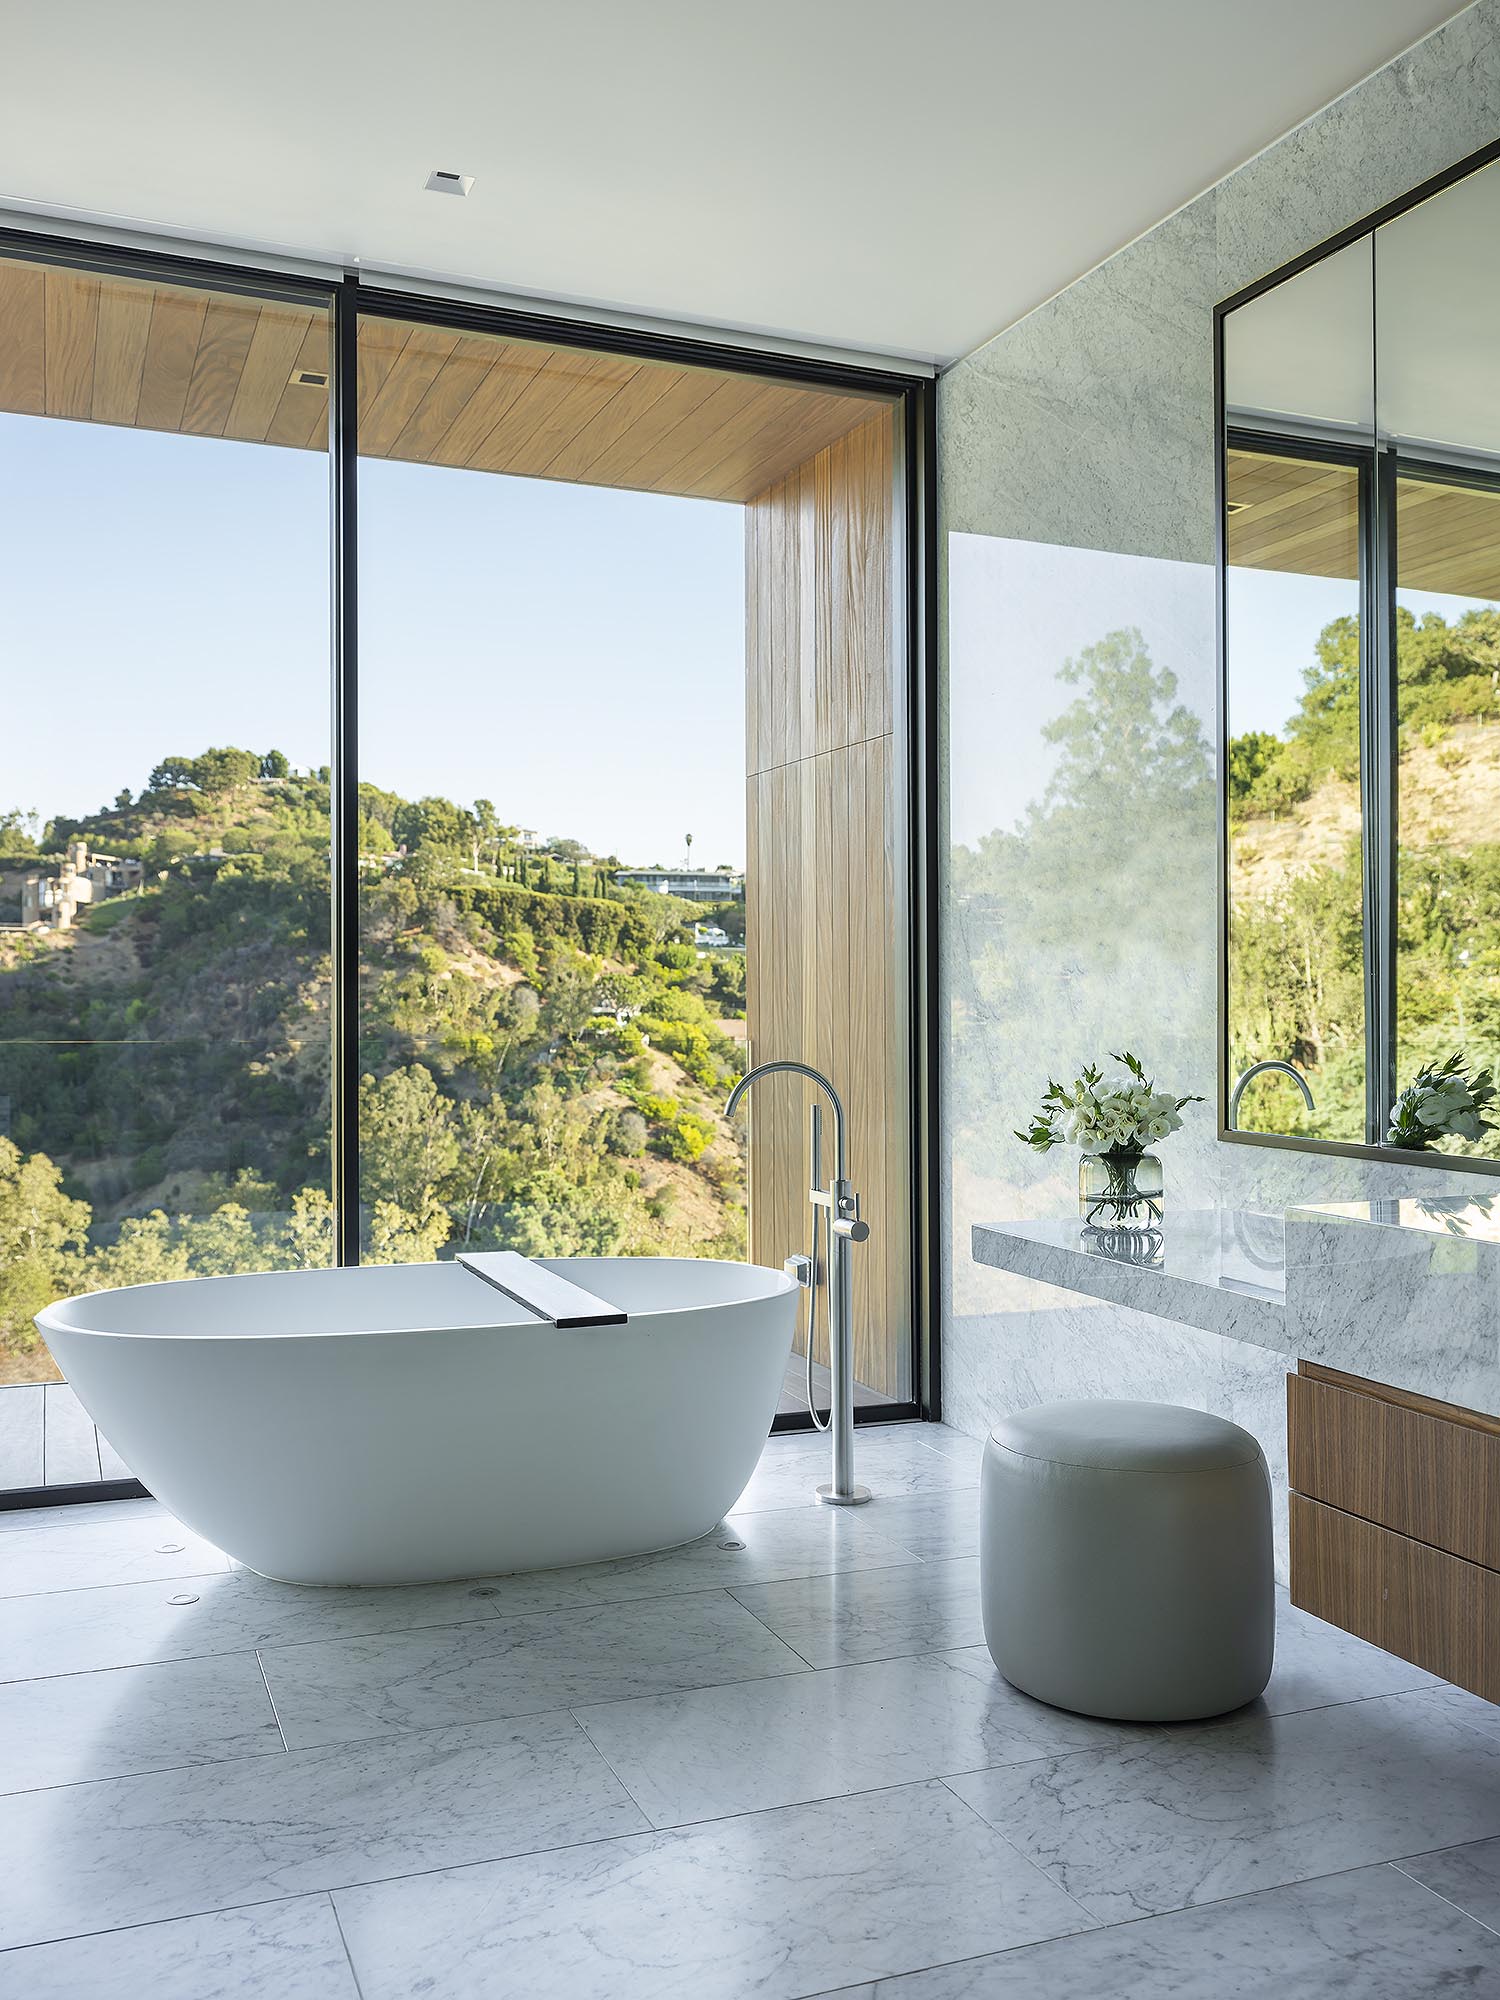 A modern bathroom with floor to ceiling windows, floating vanities, and a freestanding bathtub.